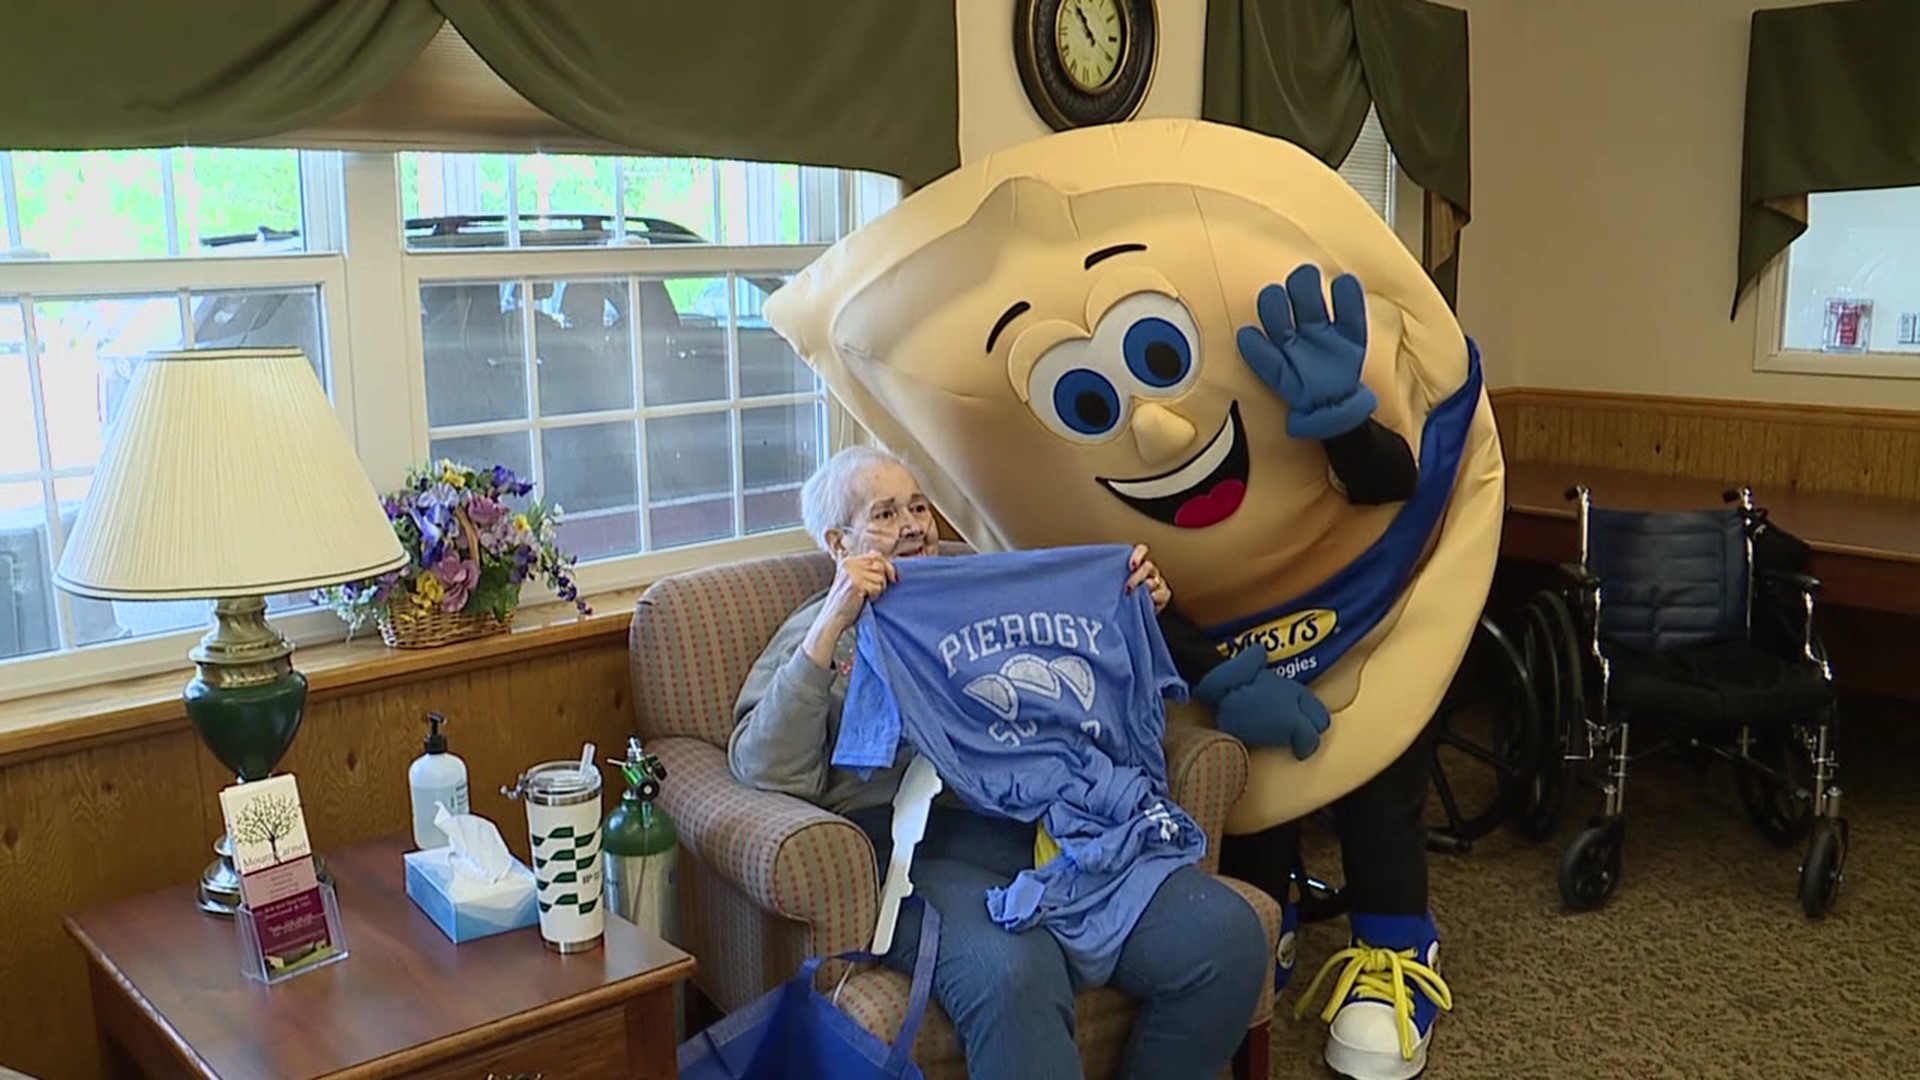 Beatrice Topolksi, 80 years old, was visited by Mrs. T's at the Mount Carmel Senior Living Community.